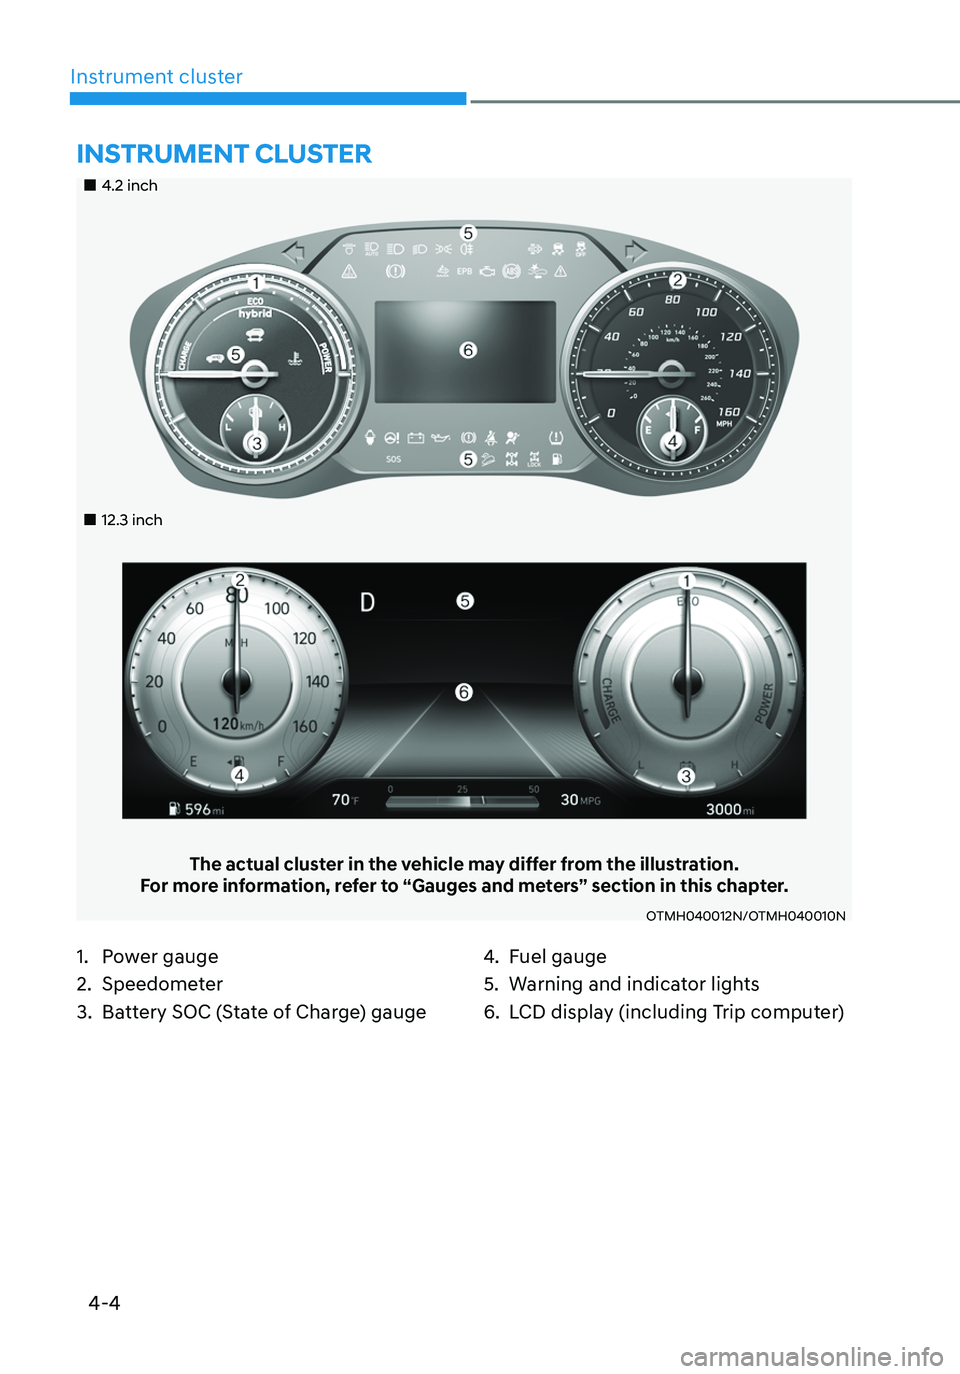 HYUNDAI SANTA FE HYBRID 2021  Owners Manual 4-4
Instrument cluster
„„4.2 inch
„„12.3 inch
The actual cluster in the vehicle may differ from the illustration.
For more information, refer to “Gauges and meters” section in 